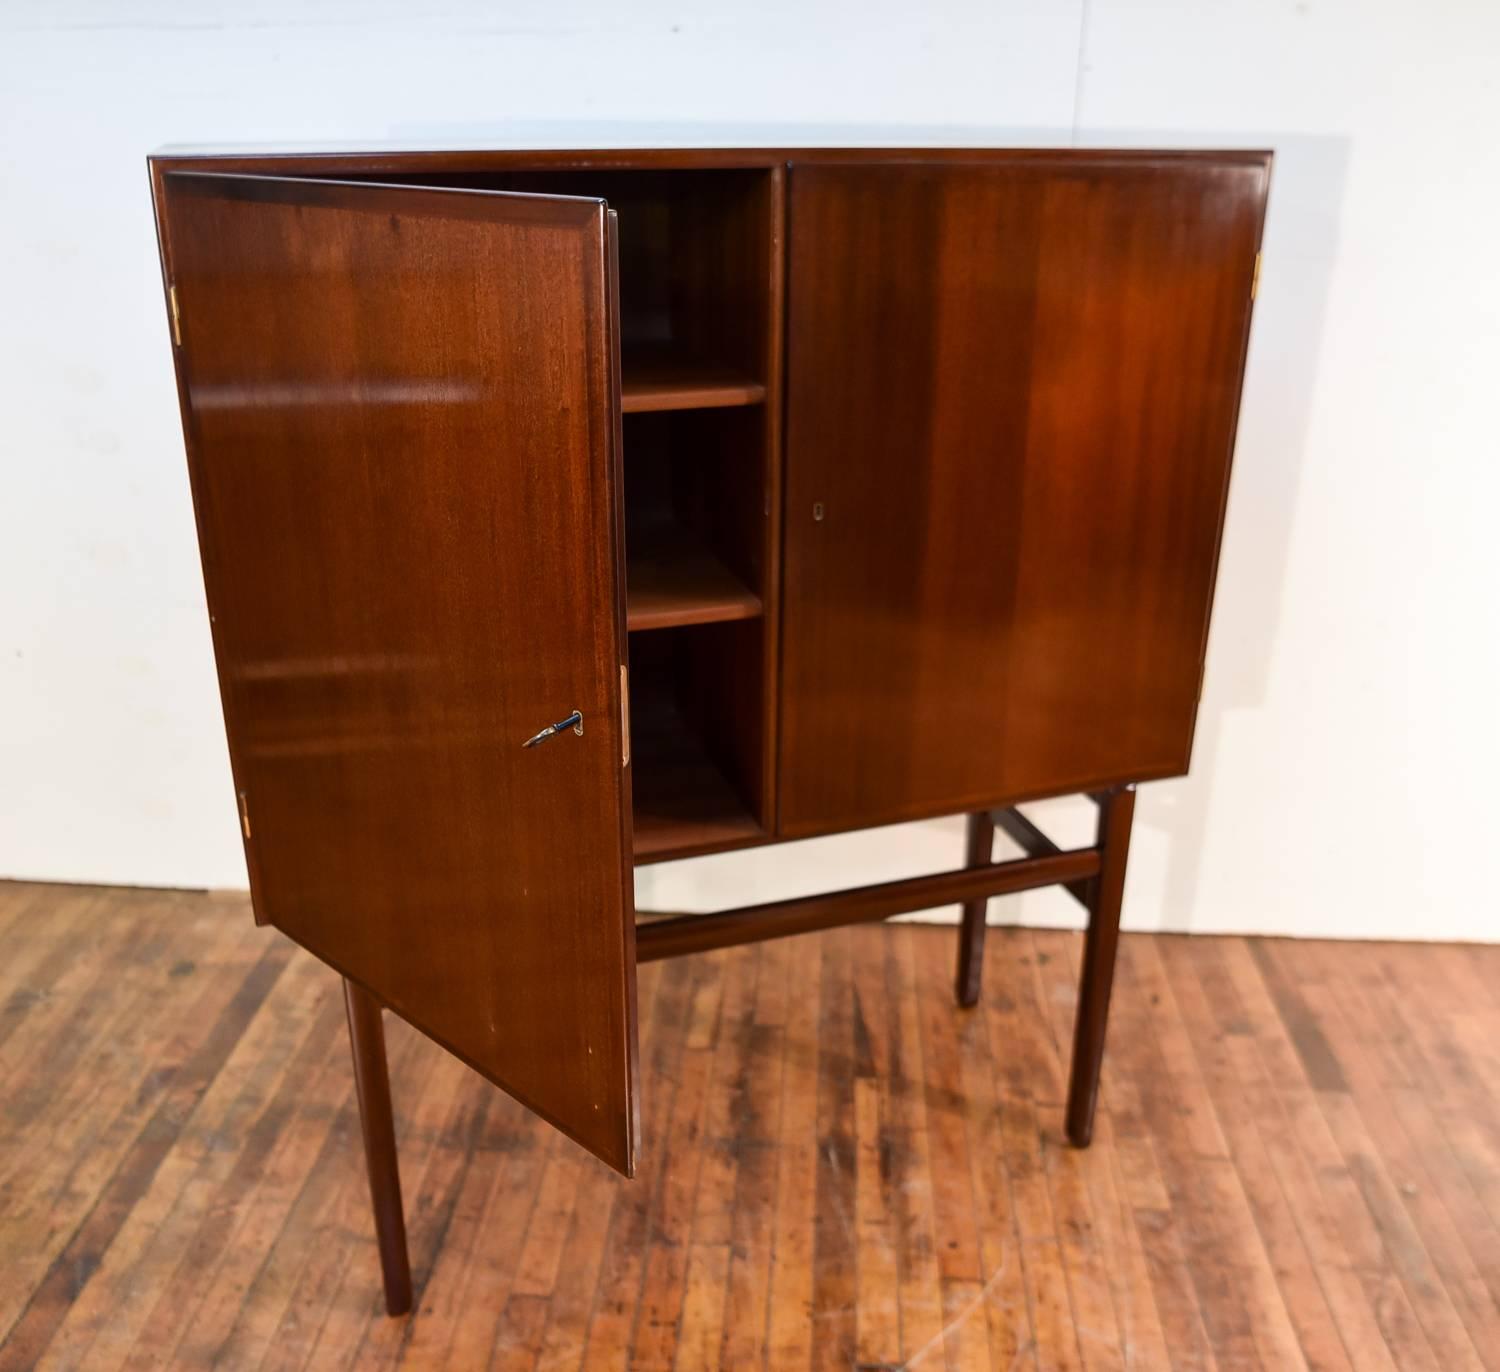 Mid-20th Century Danish Rungstedlund Mahogany Highboard by Ole Wanscher for Poul Jeppesen